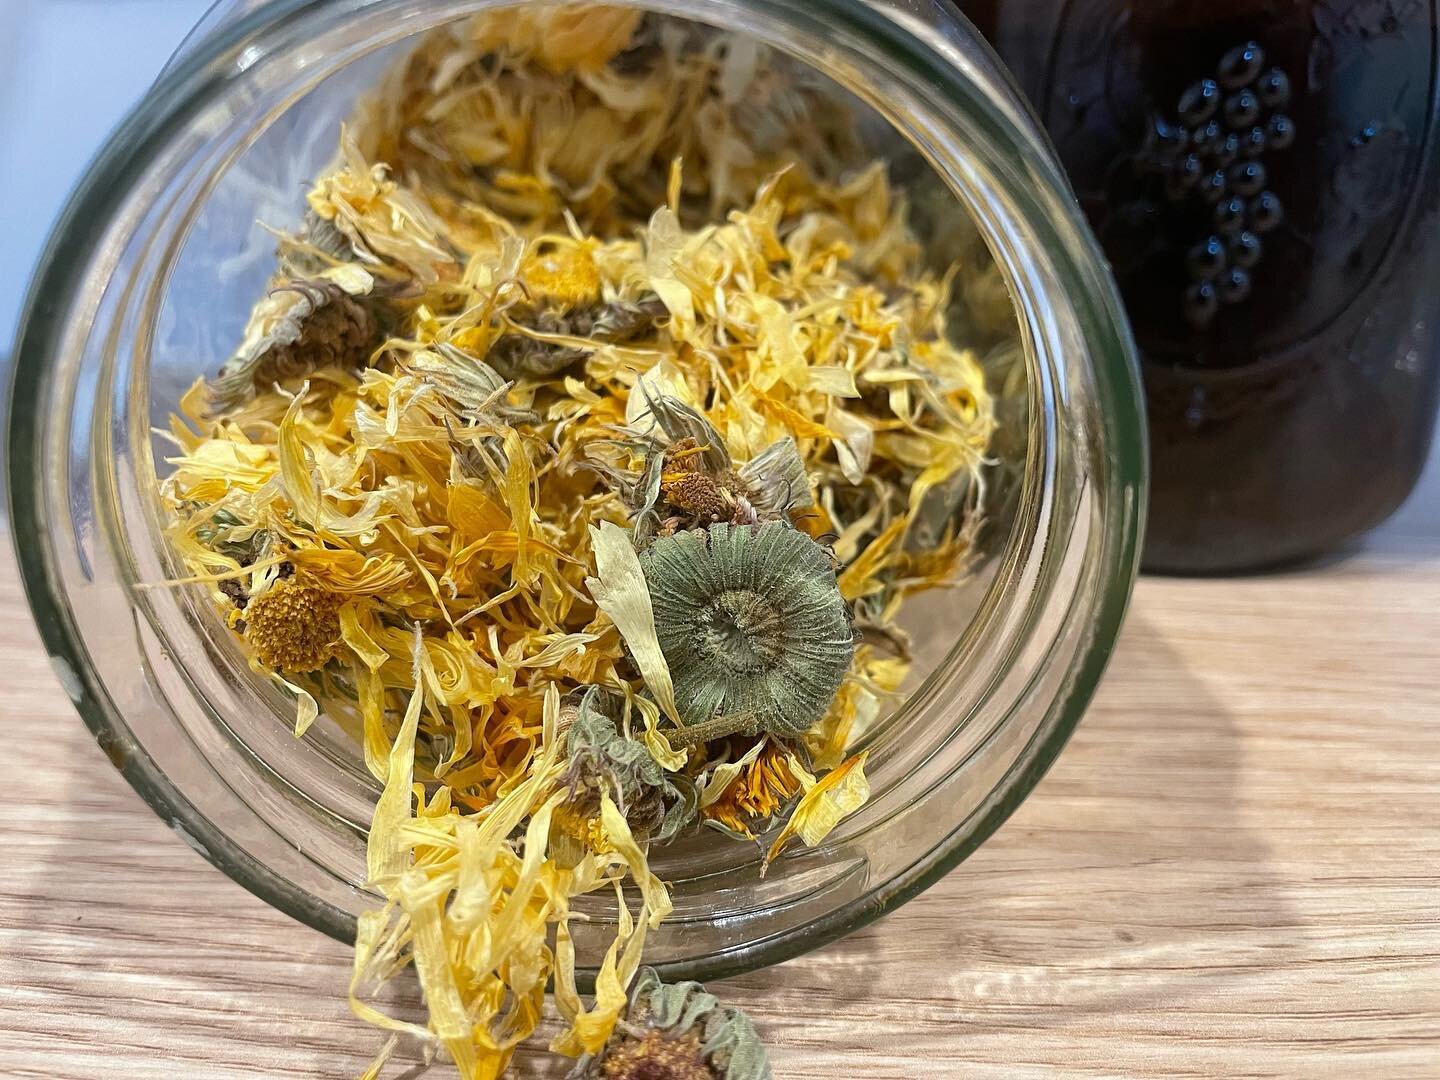 💙Dried organic calendula flowers infused in extra virgin olive oil. 💙Use topically to help with muscle strains 💙Great as a wound healer 💙Awesome as an inflammation modulator 💙I rubbed this on my strained neck and shoulder muscle and pain has sub